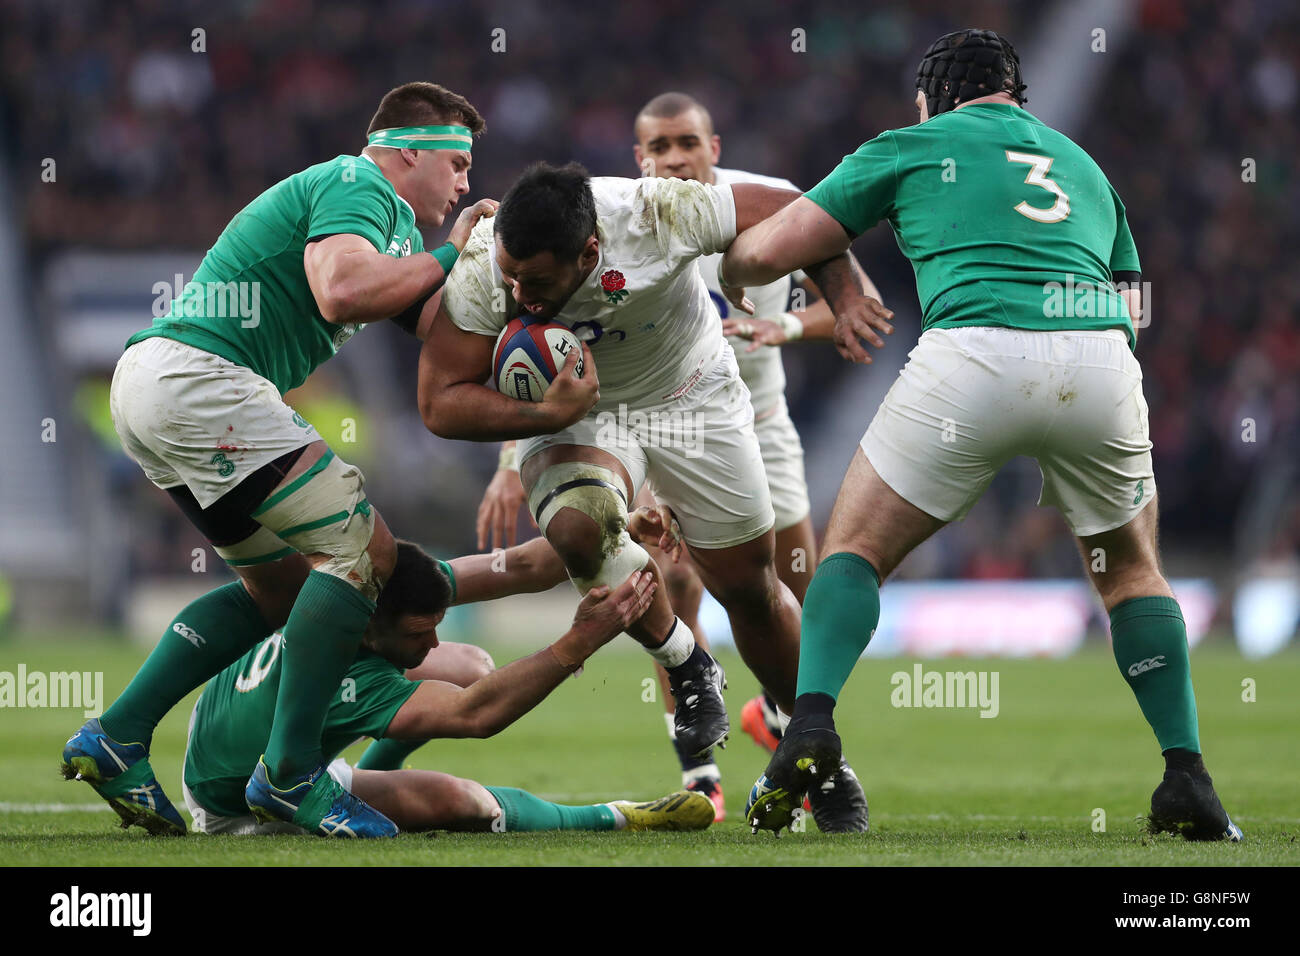 England's Mako Vunipola (centre) is tackled by Ireland's CJ Stander (left) and Mike Ross during the 2016 RBS Six Nations match at Twickenham Stadium, London. PRESS ASSOCIATION Photo. Picture date: Saturday February 27, 2016. See PA story RUGBYU England. Photo credit should read: David Davies/PA Wire. RESTRICTIONS: , No commercial use without prior permission, please contact PA Images for further information: Tel: +44 (0) 115 8447447. Stock Photo